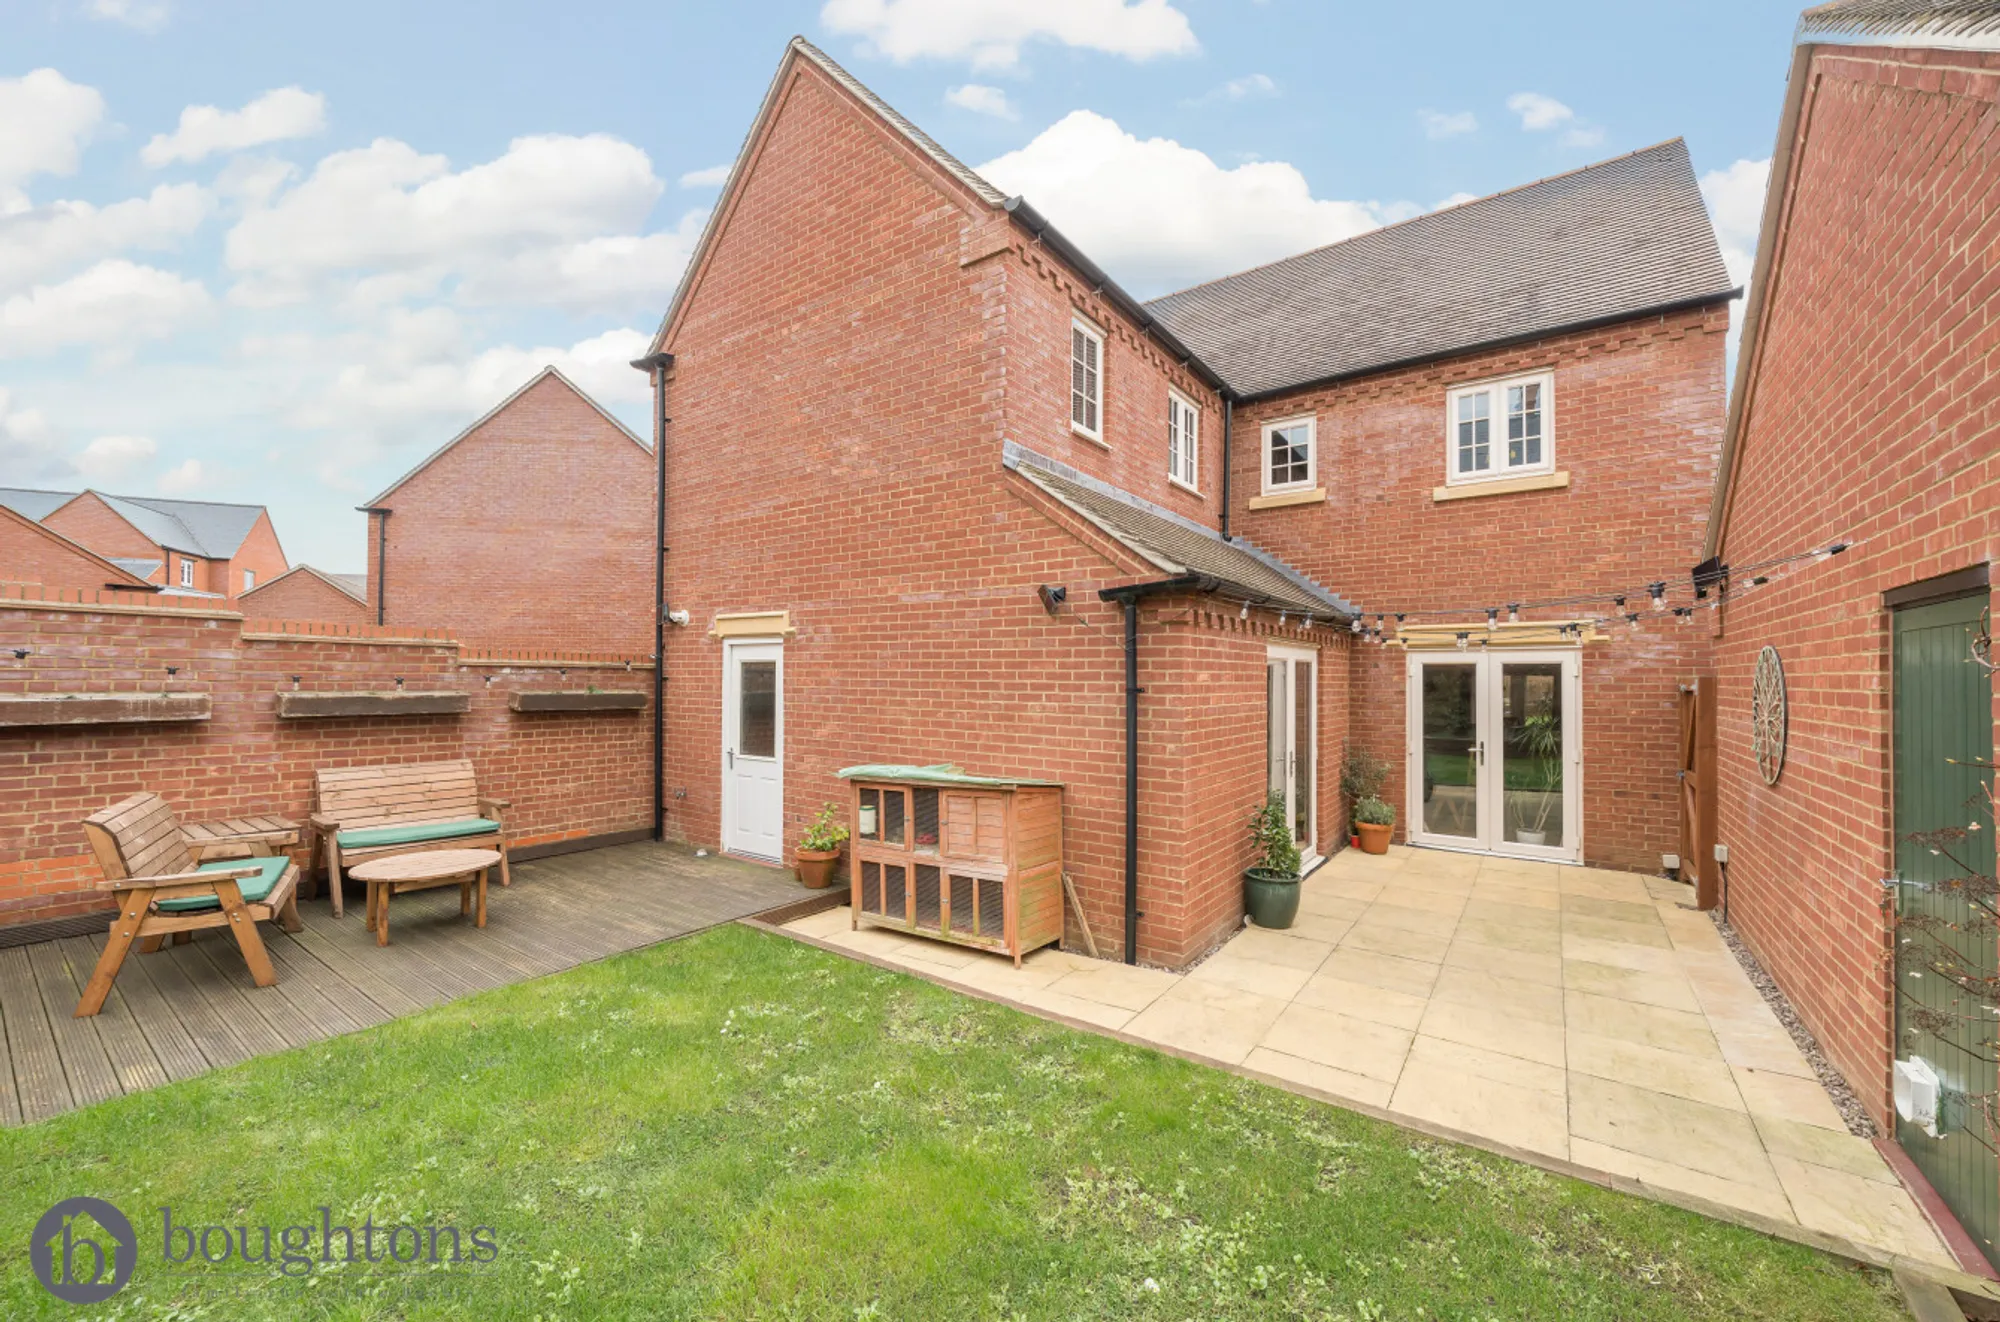 4 bed detached house for sale in Delorean Way, Brackley  - Property Image 18